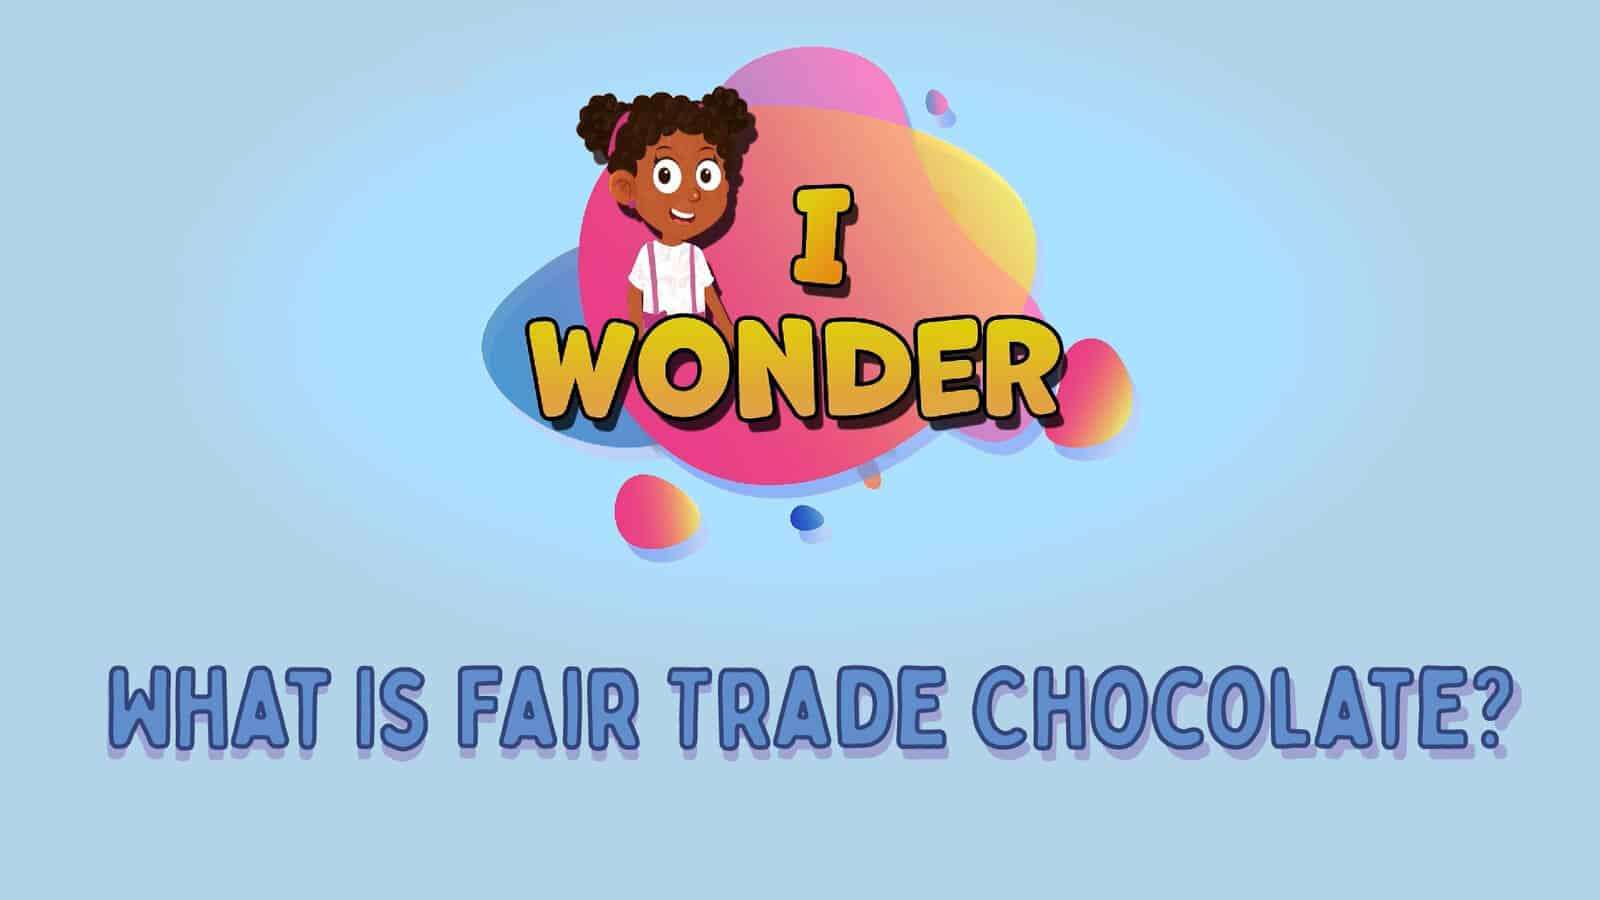 What Is Fair Trade Chocolate?